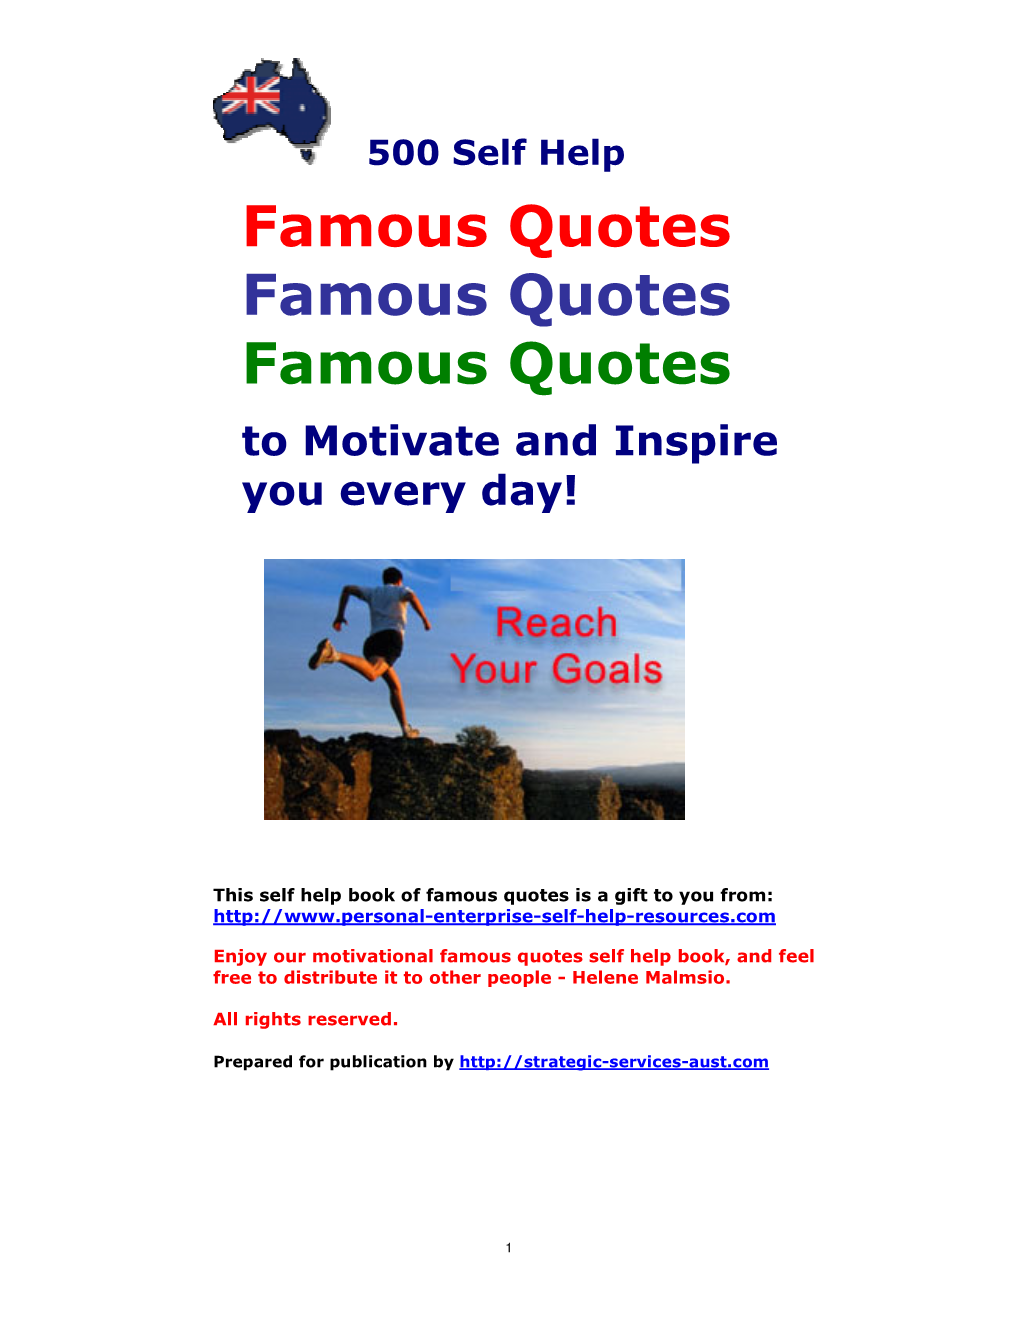 Self Help Book of 500 Famous Quotes